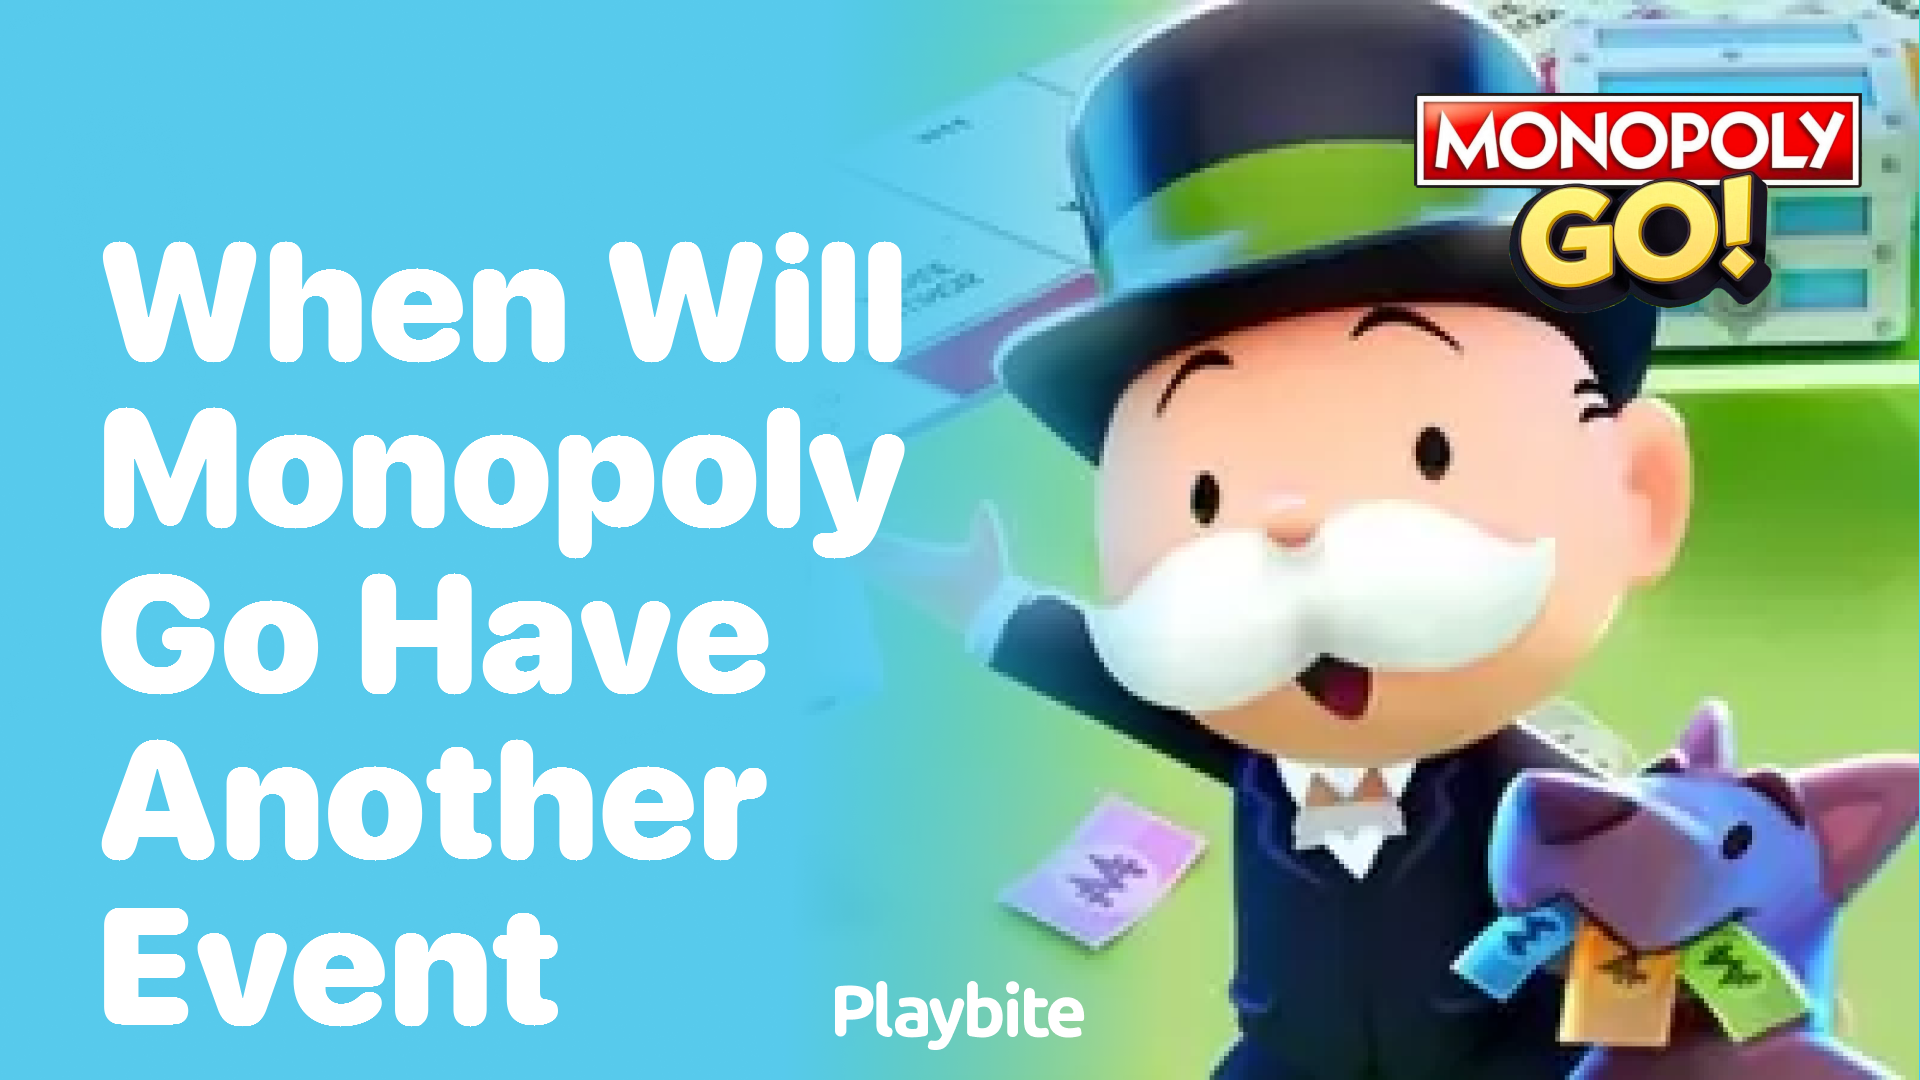 When Will Monopoly Go Have Another Event?